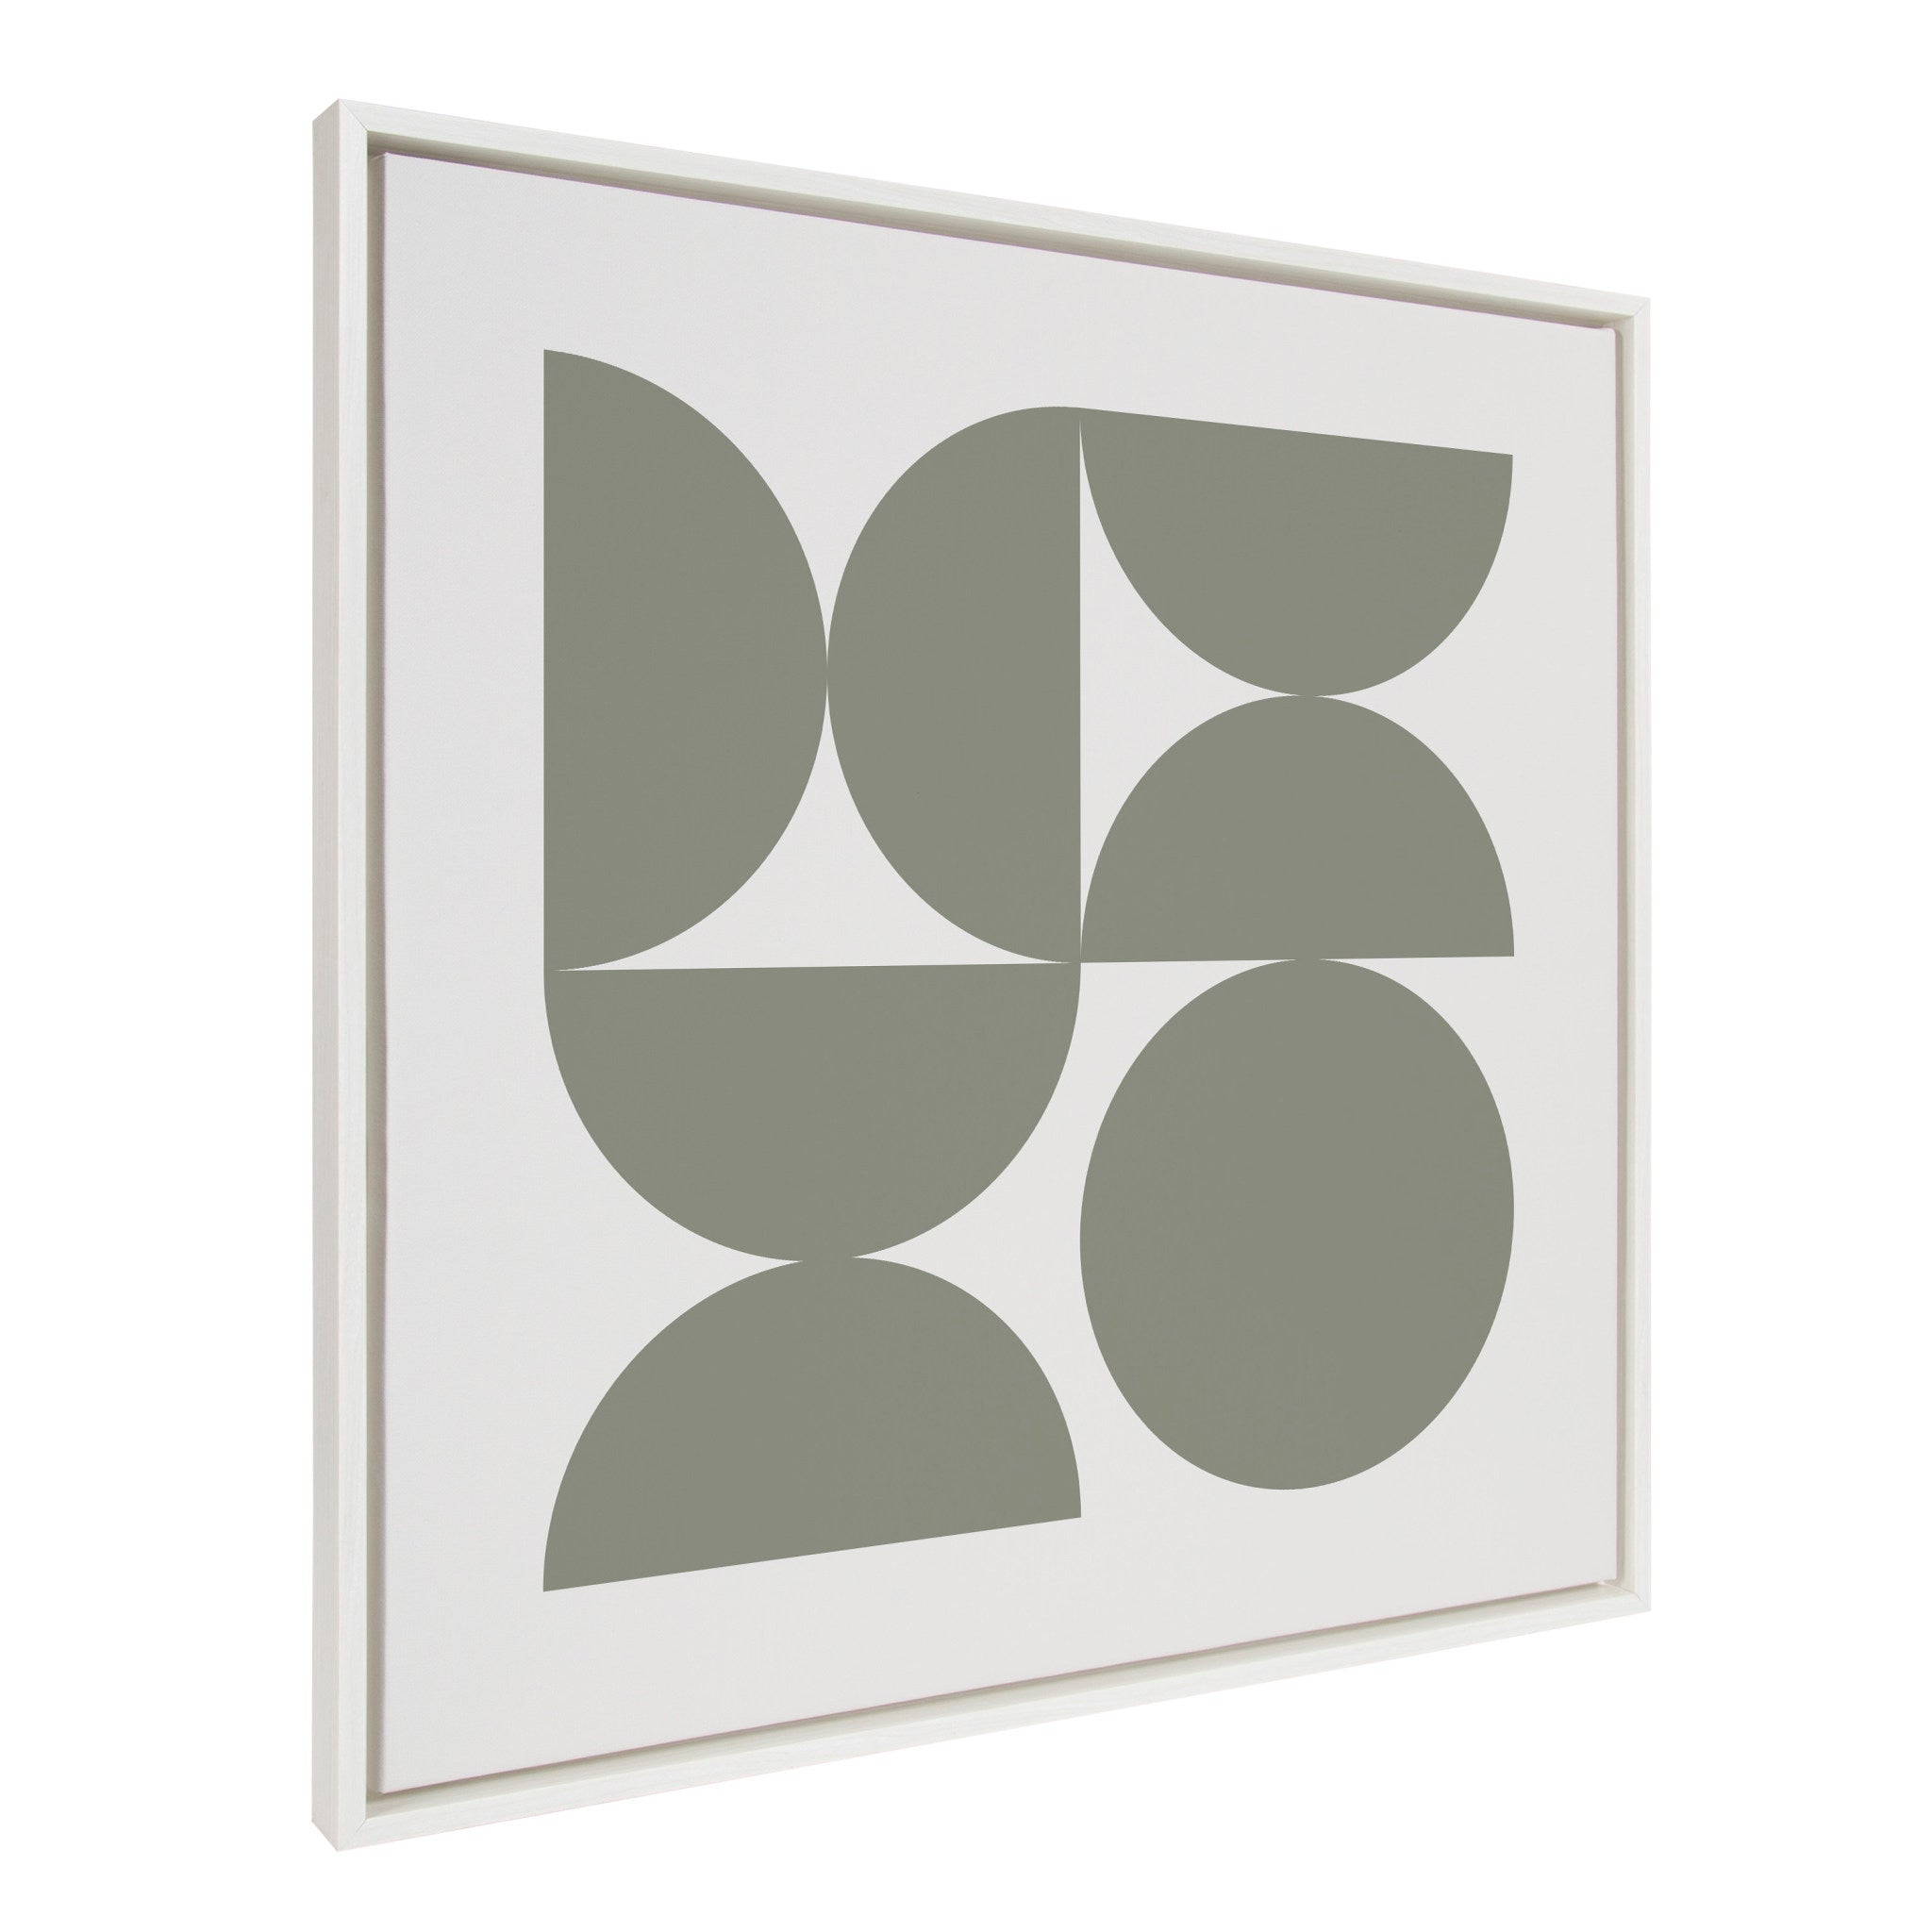 Sylvie Bold Vintage Geometric Sage Green on Soft White Framed Canvas by The Creative Bunch Studio